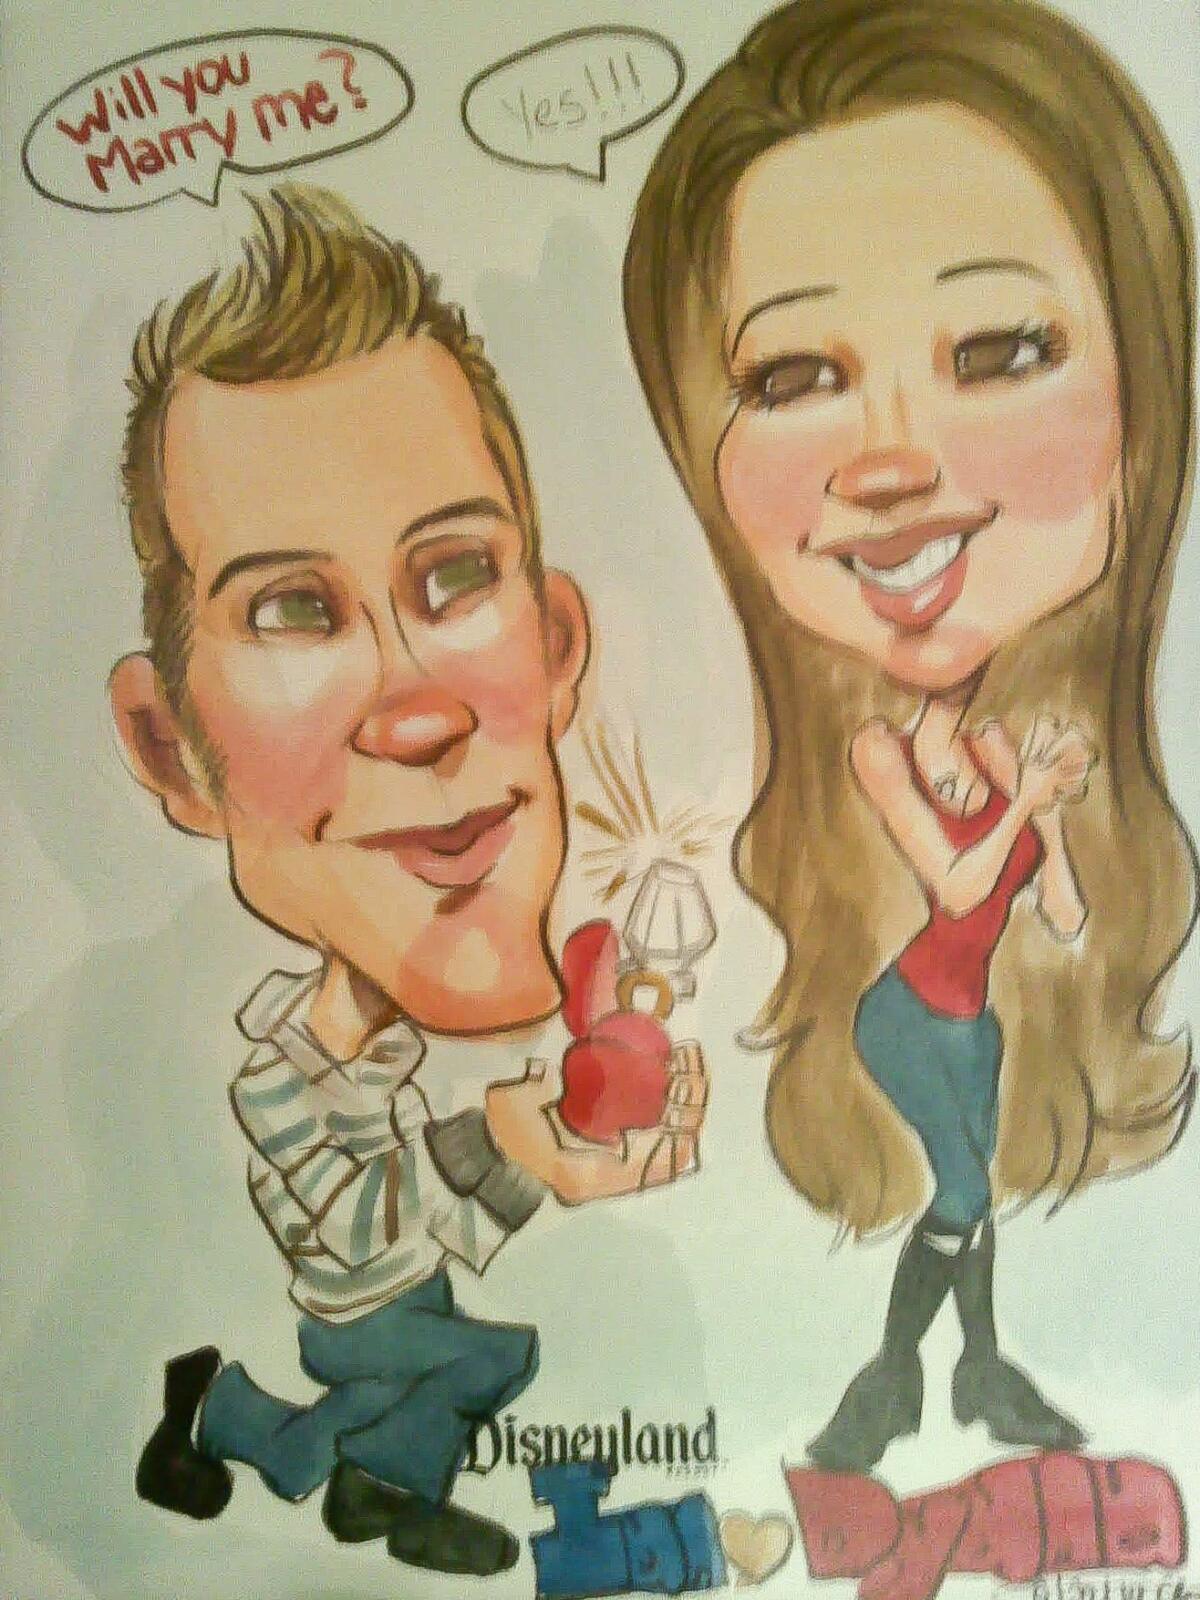 A drawing of Ian Hoover proposing to his wife, Dyana, a fellow Disney cast member.